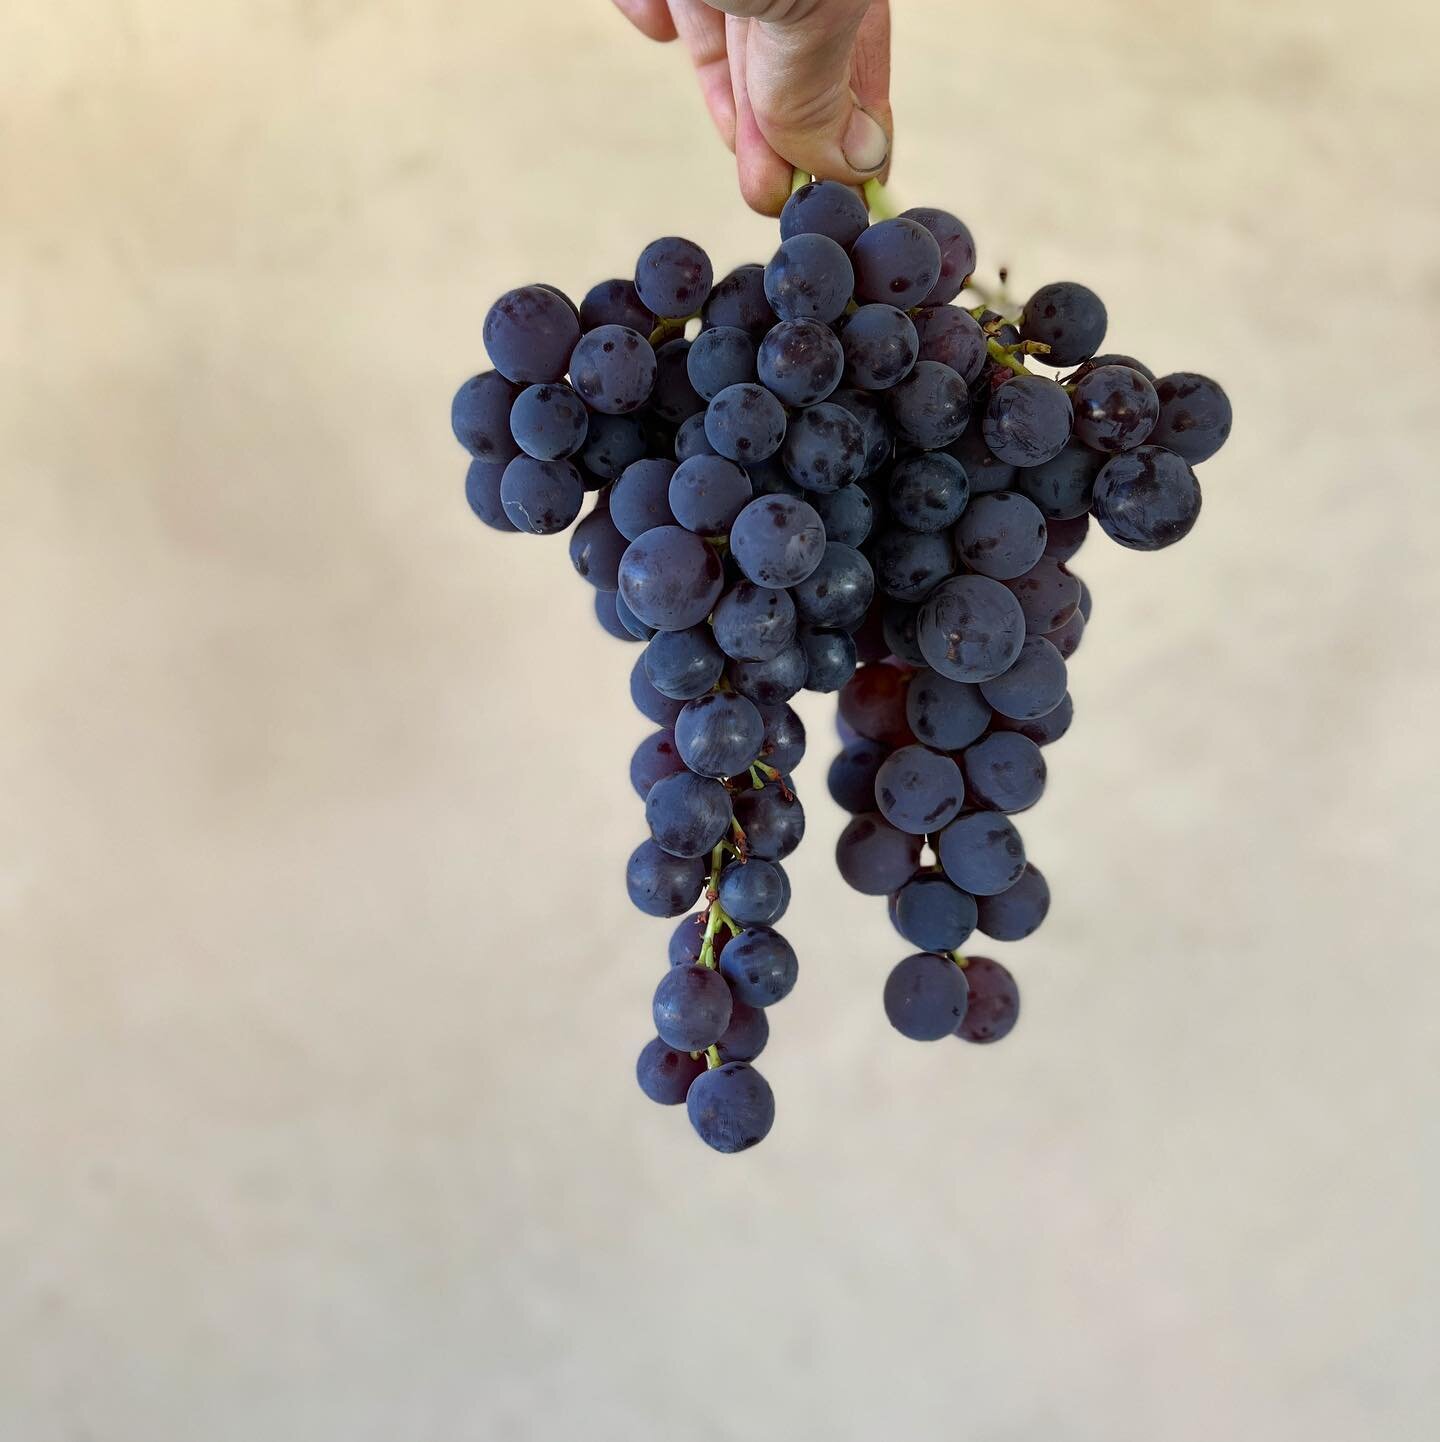 The first ripe variety of table grape, Venus, is available this weekend at the farm stand only. It also happens to be the perfect appetizer before pizza. Luckily you can have both at our annual pizza pop up this Labor Day weekend! 
🍇 🍕 🍇